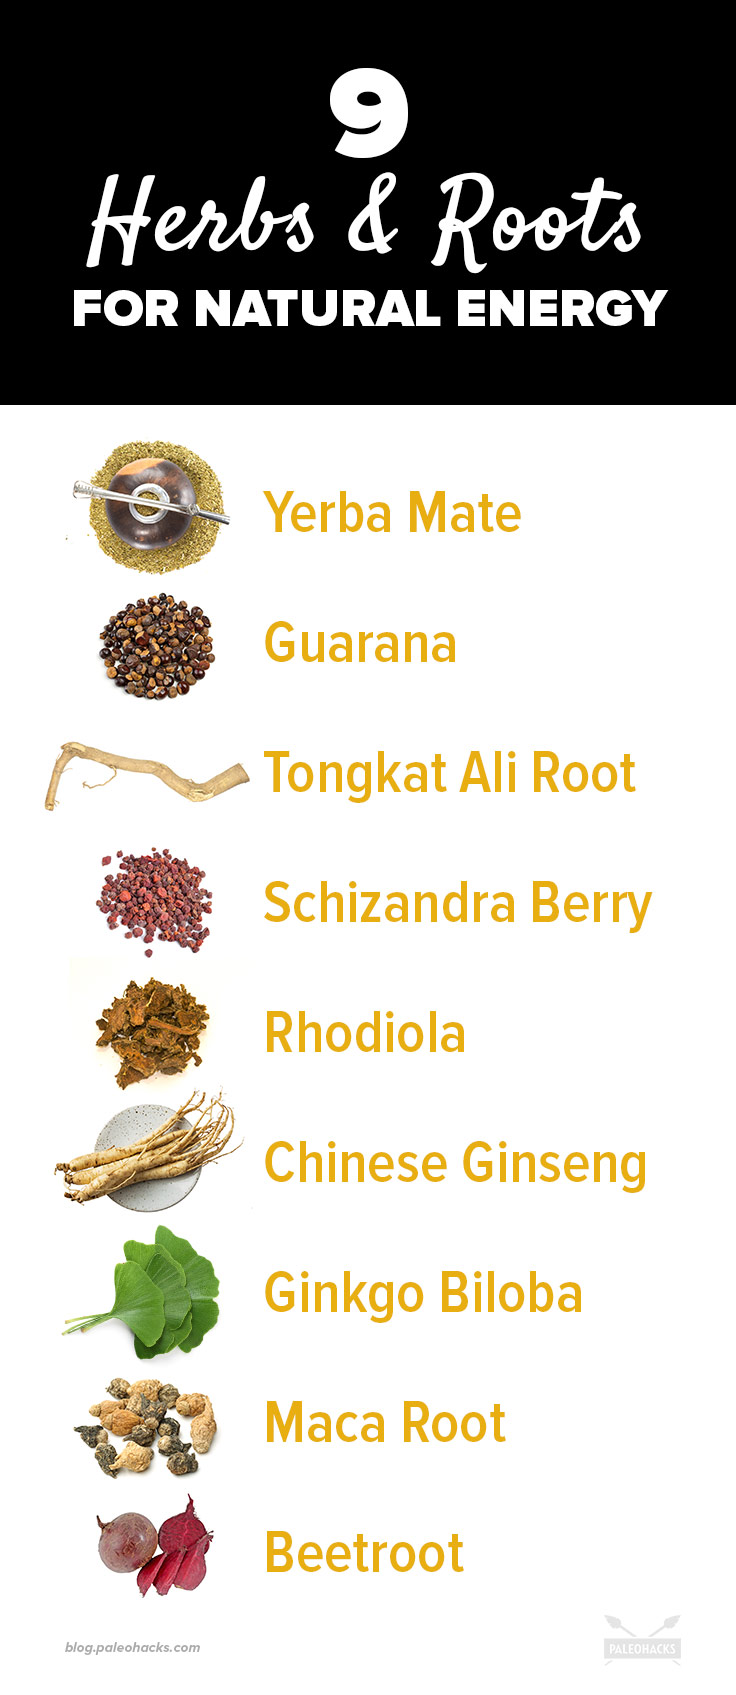 Coffee leaving you feeling tired and sluggish in the afternoon? Try these energizing herbs for a lasting morning boost -- no jitters!